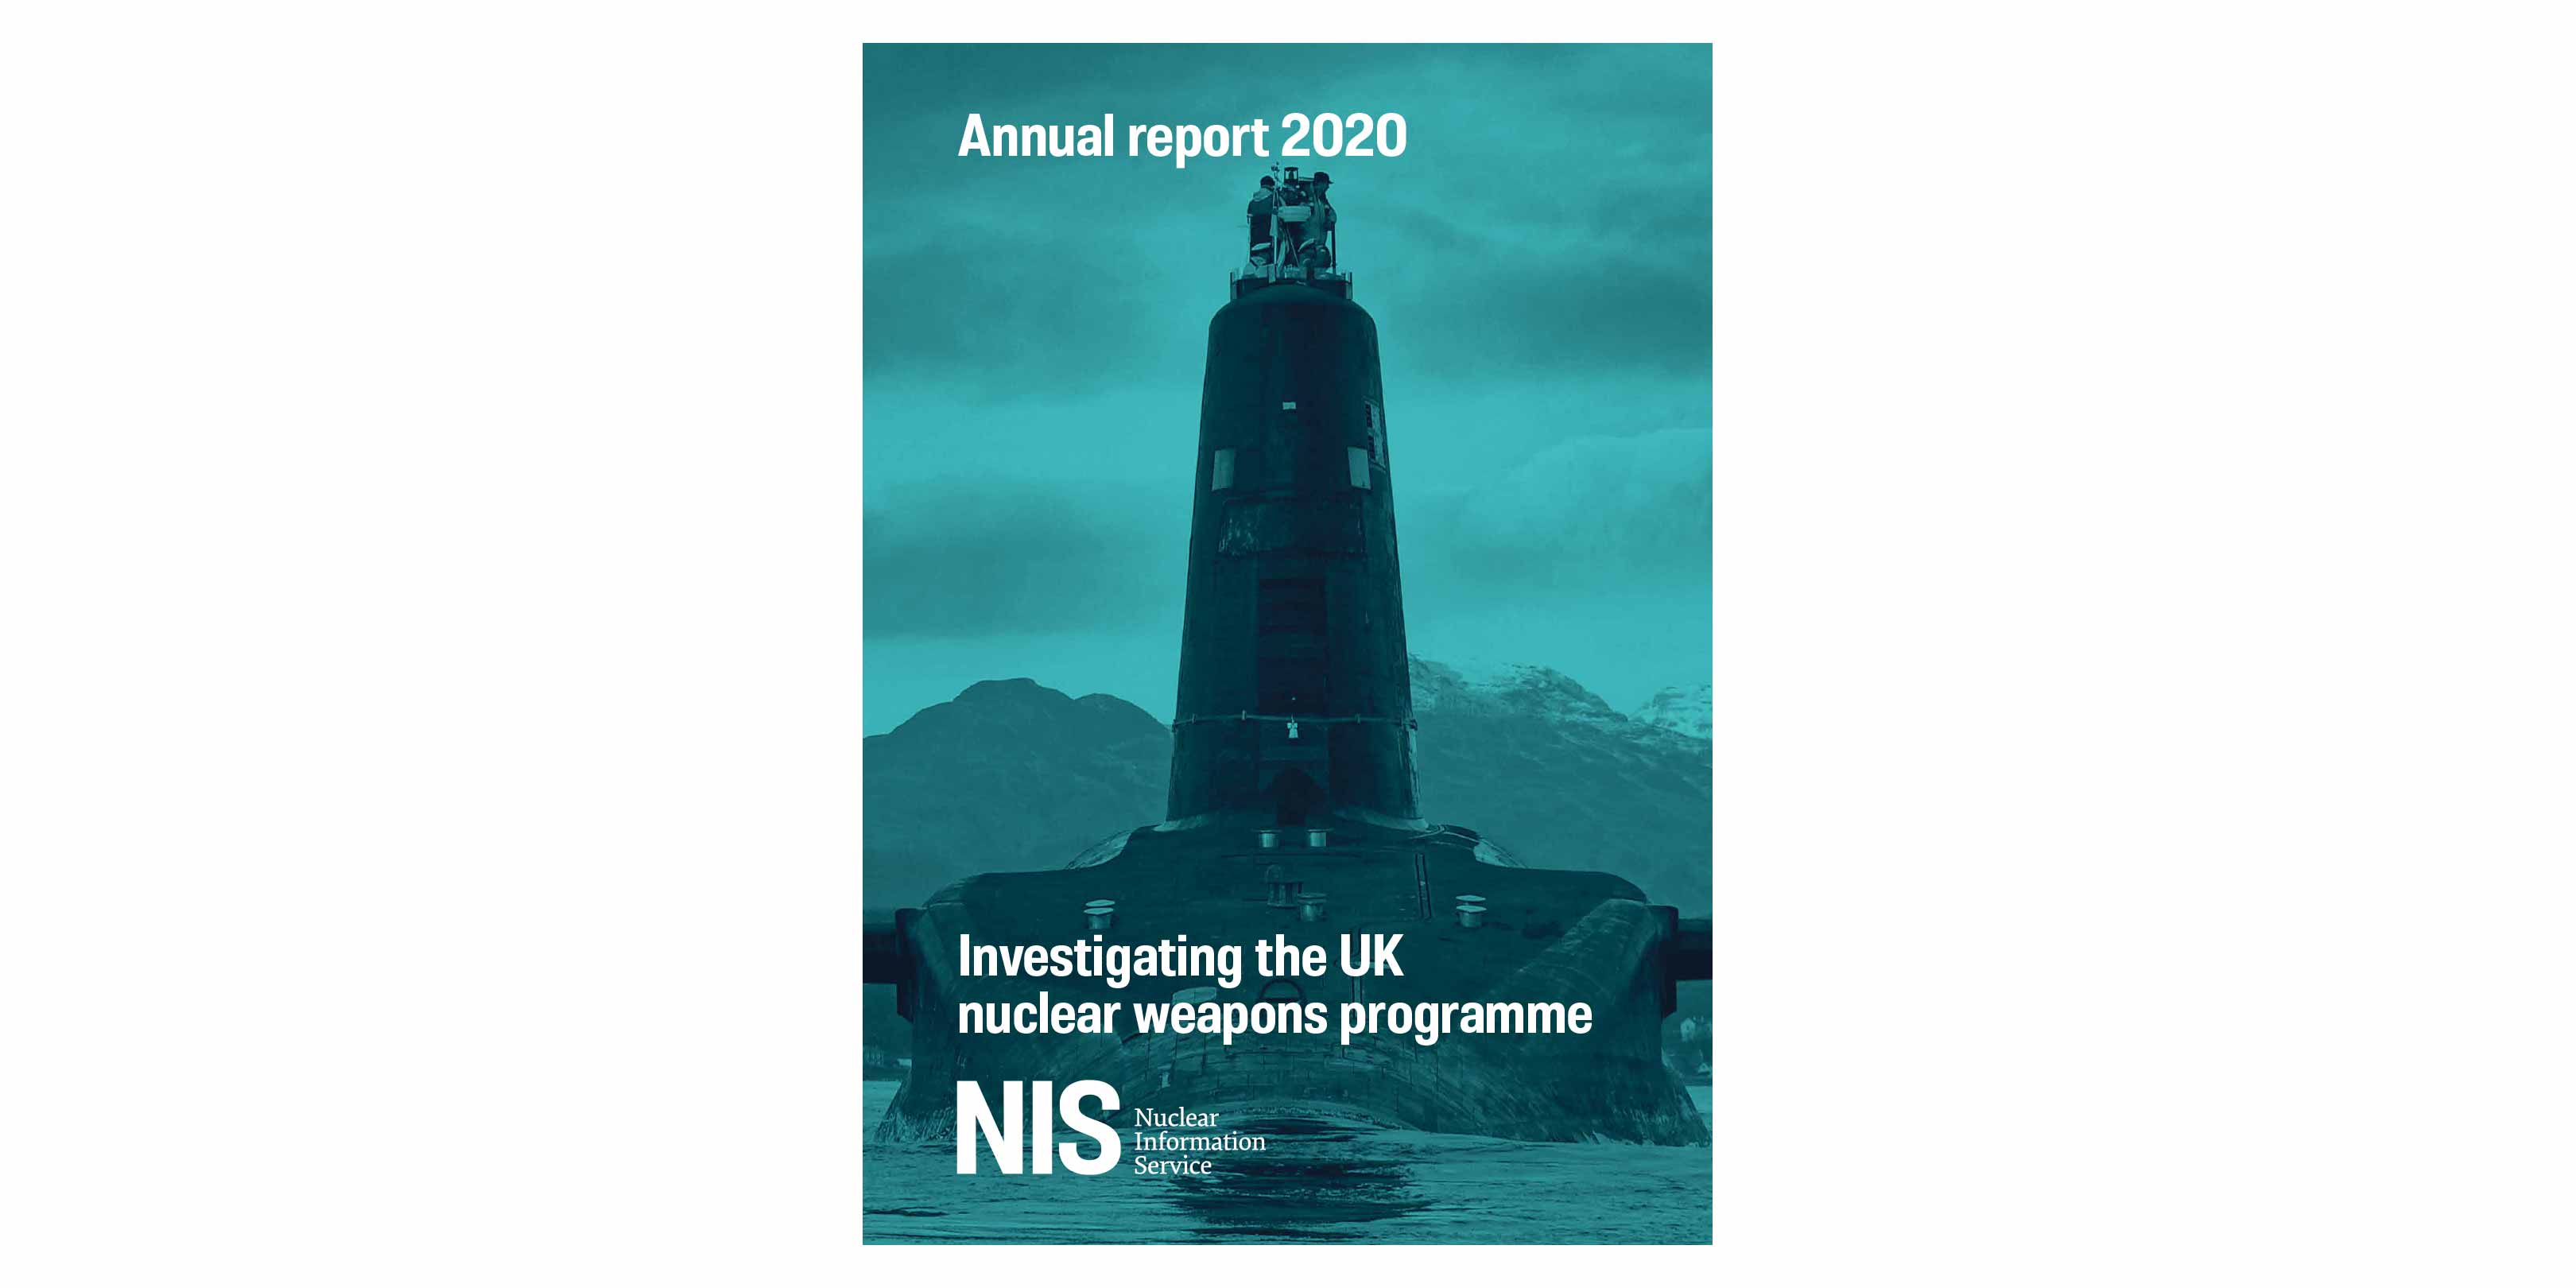 Nuclear Information Service annual report 2020